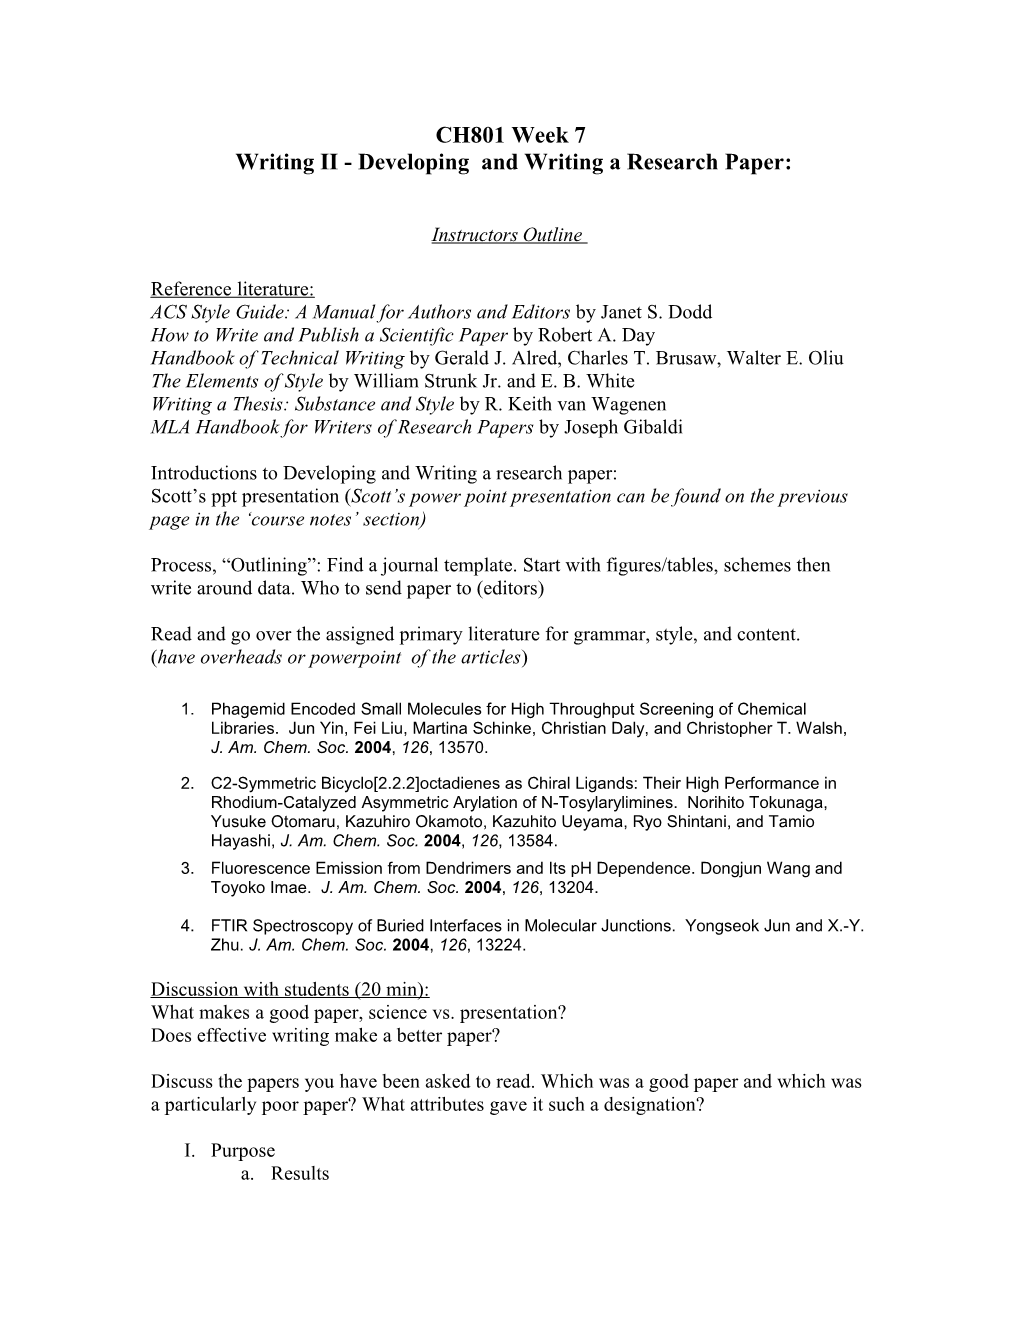 Writing II: Writing a Research Paper